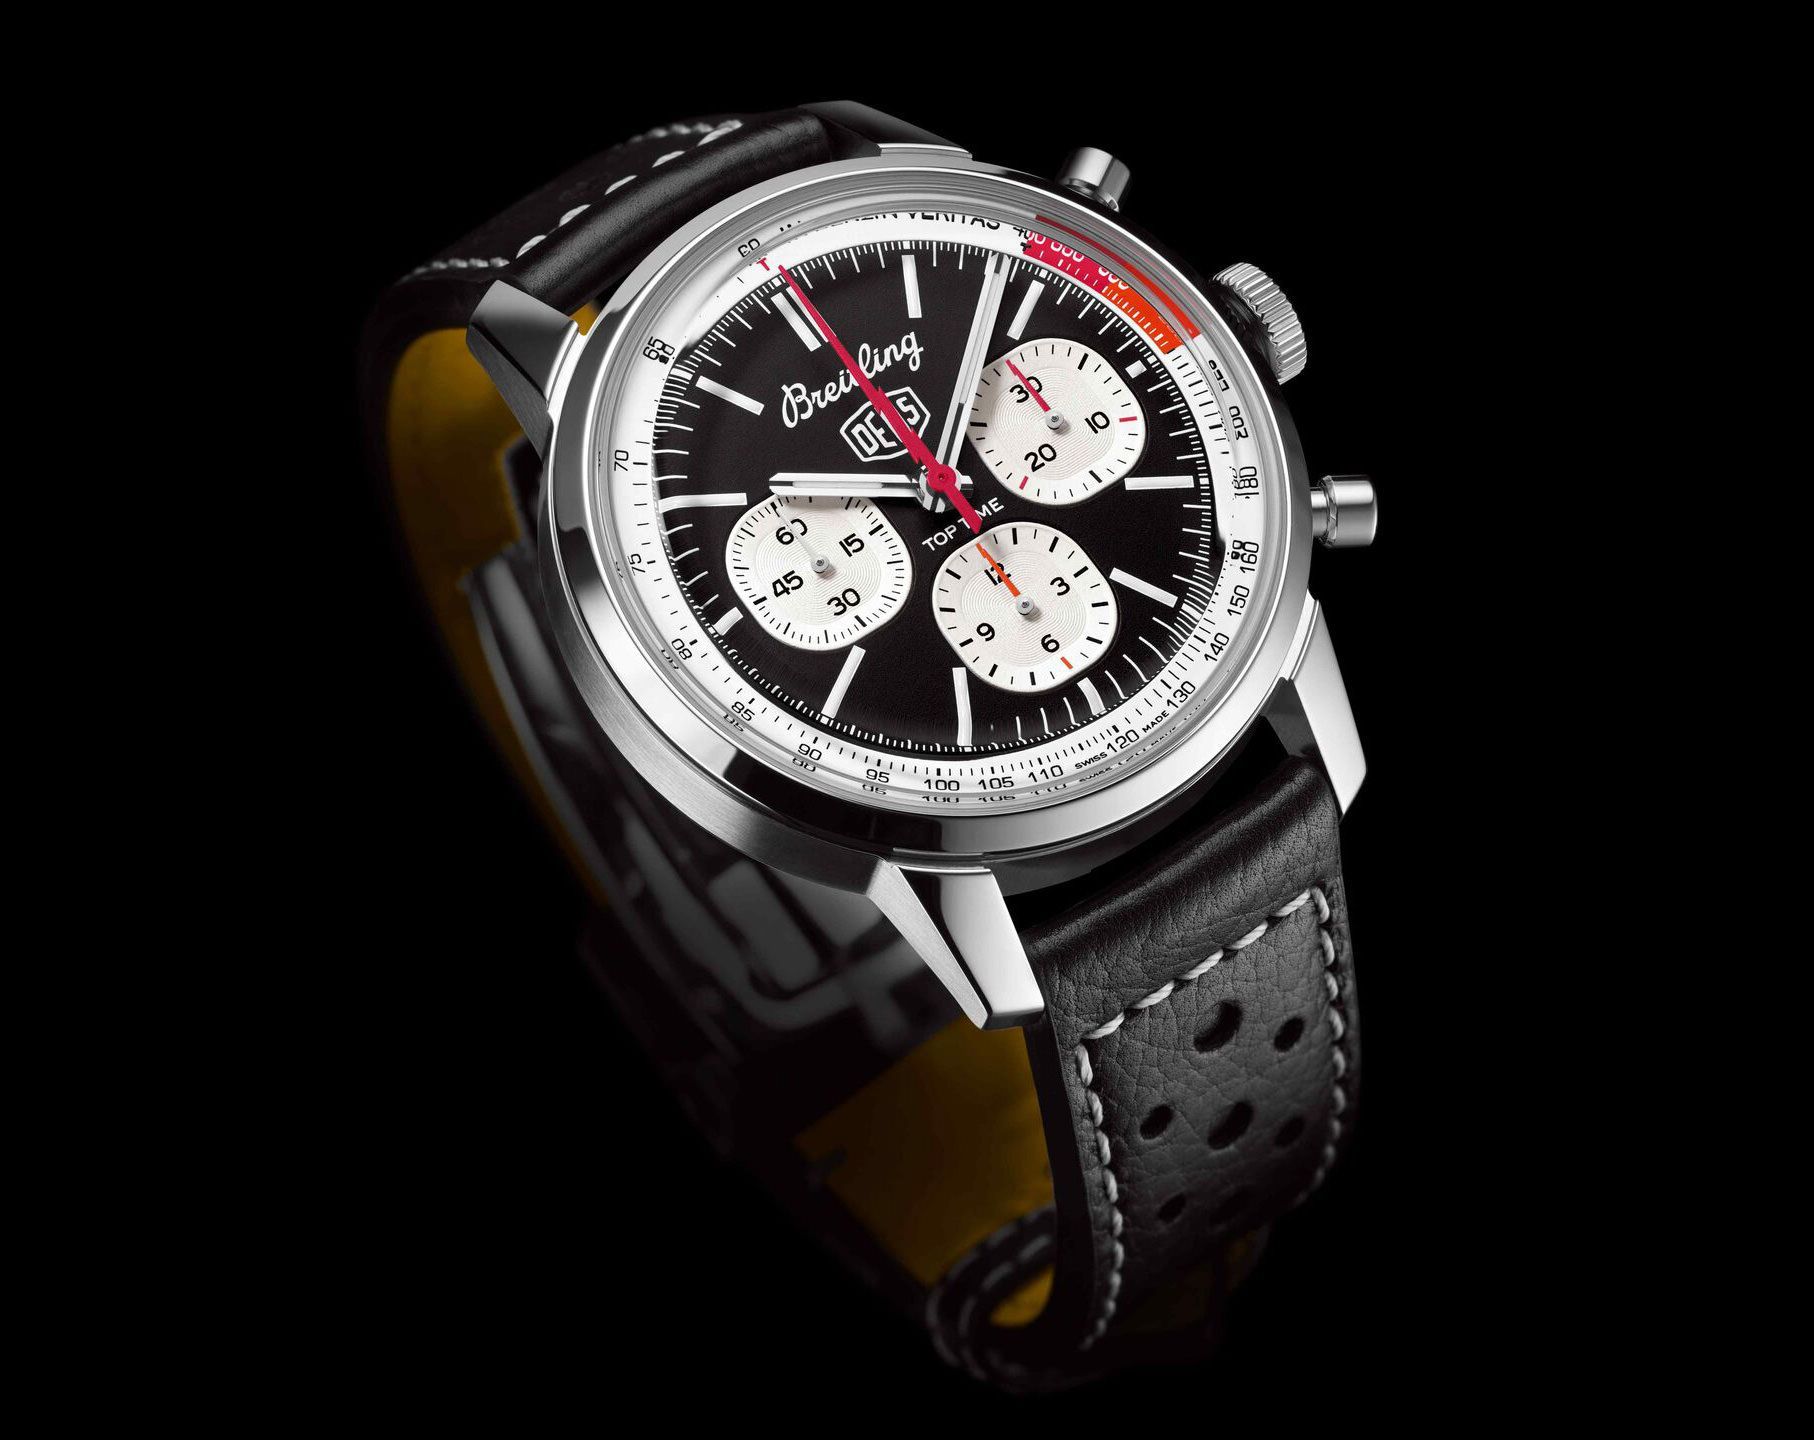 Breitling Top Time Triumph for $4,700 for sale from a Private